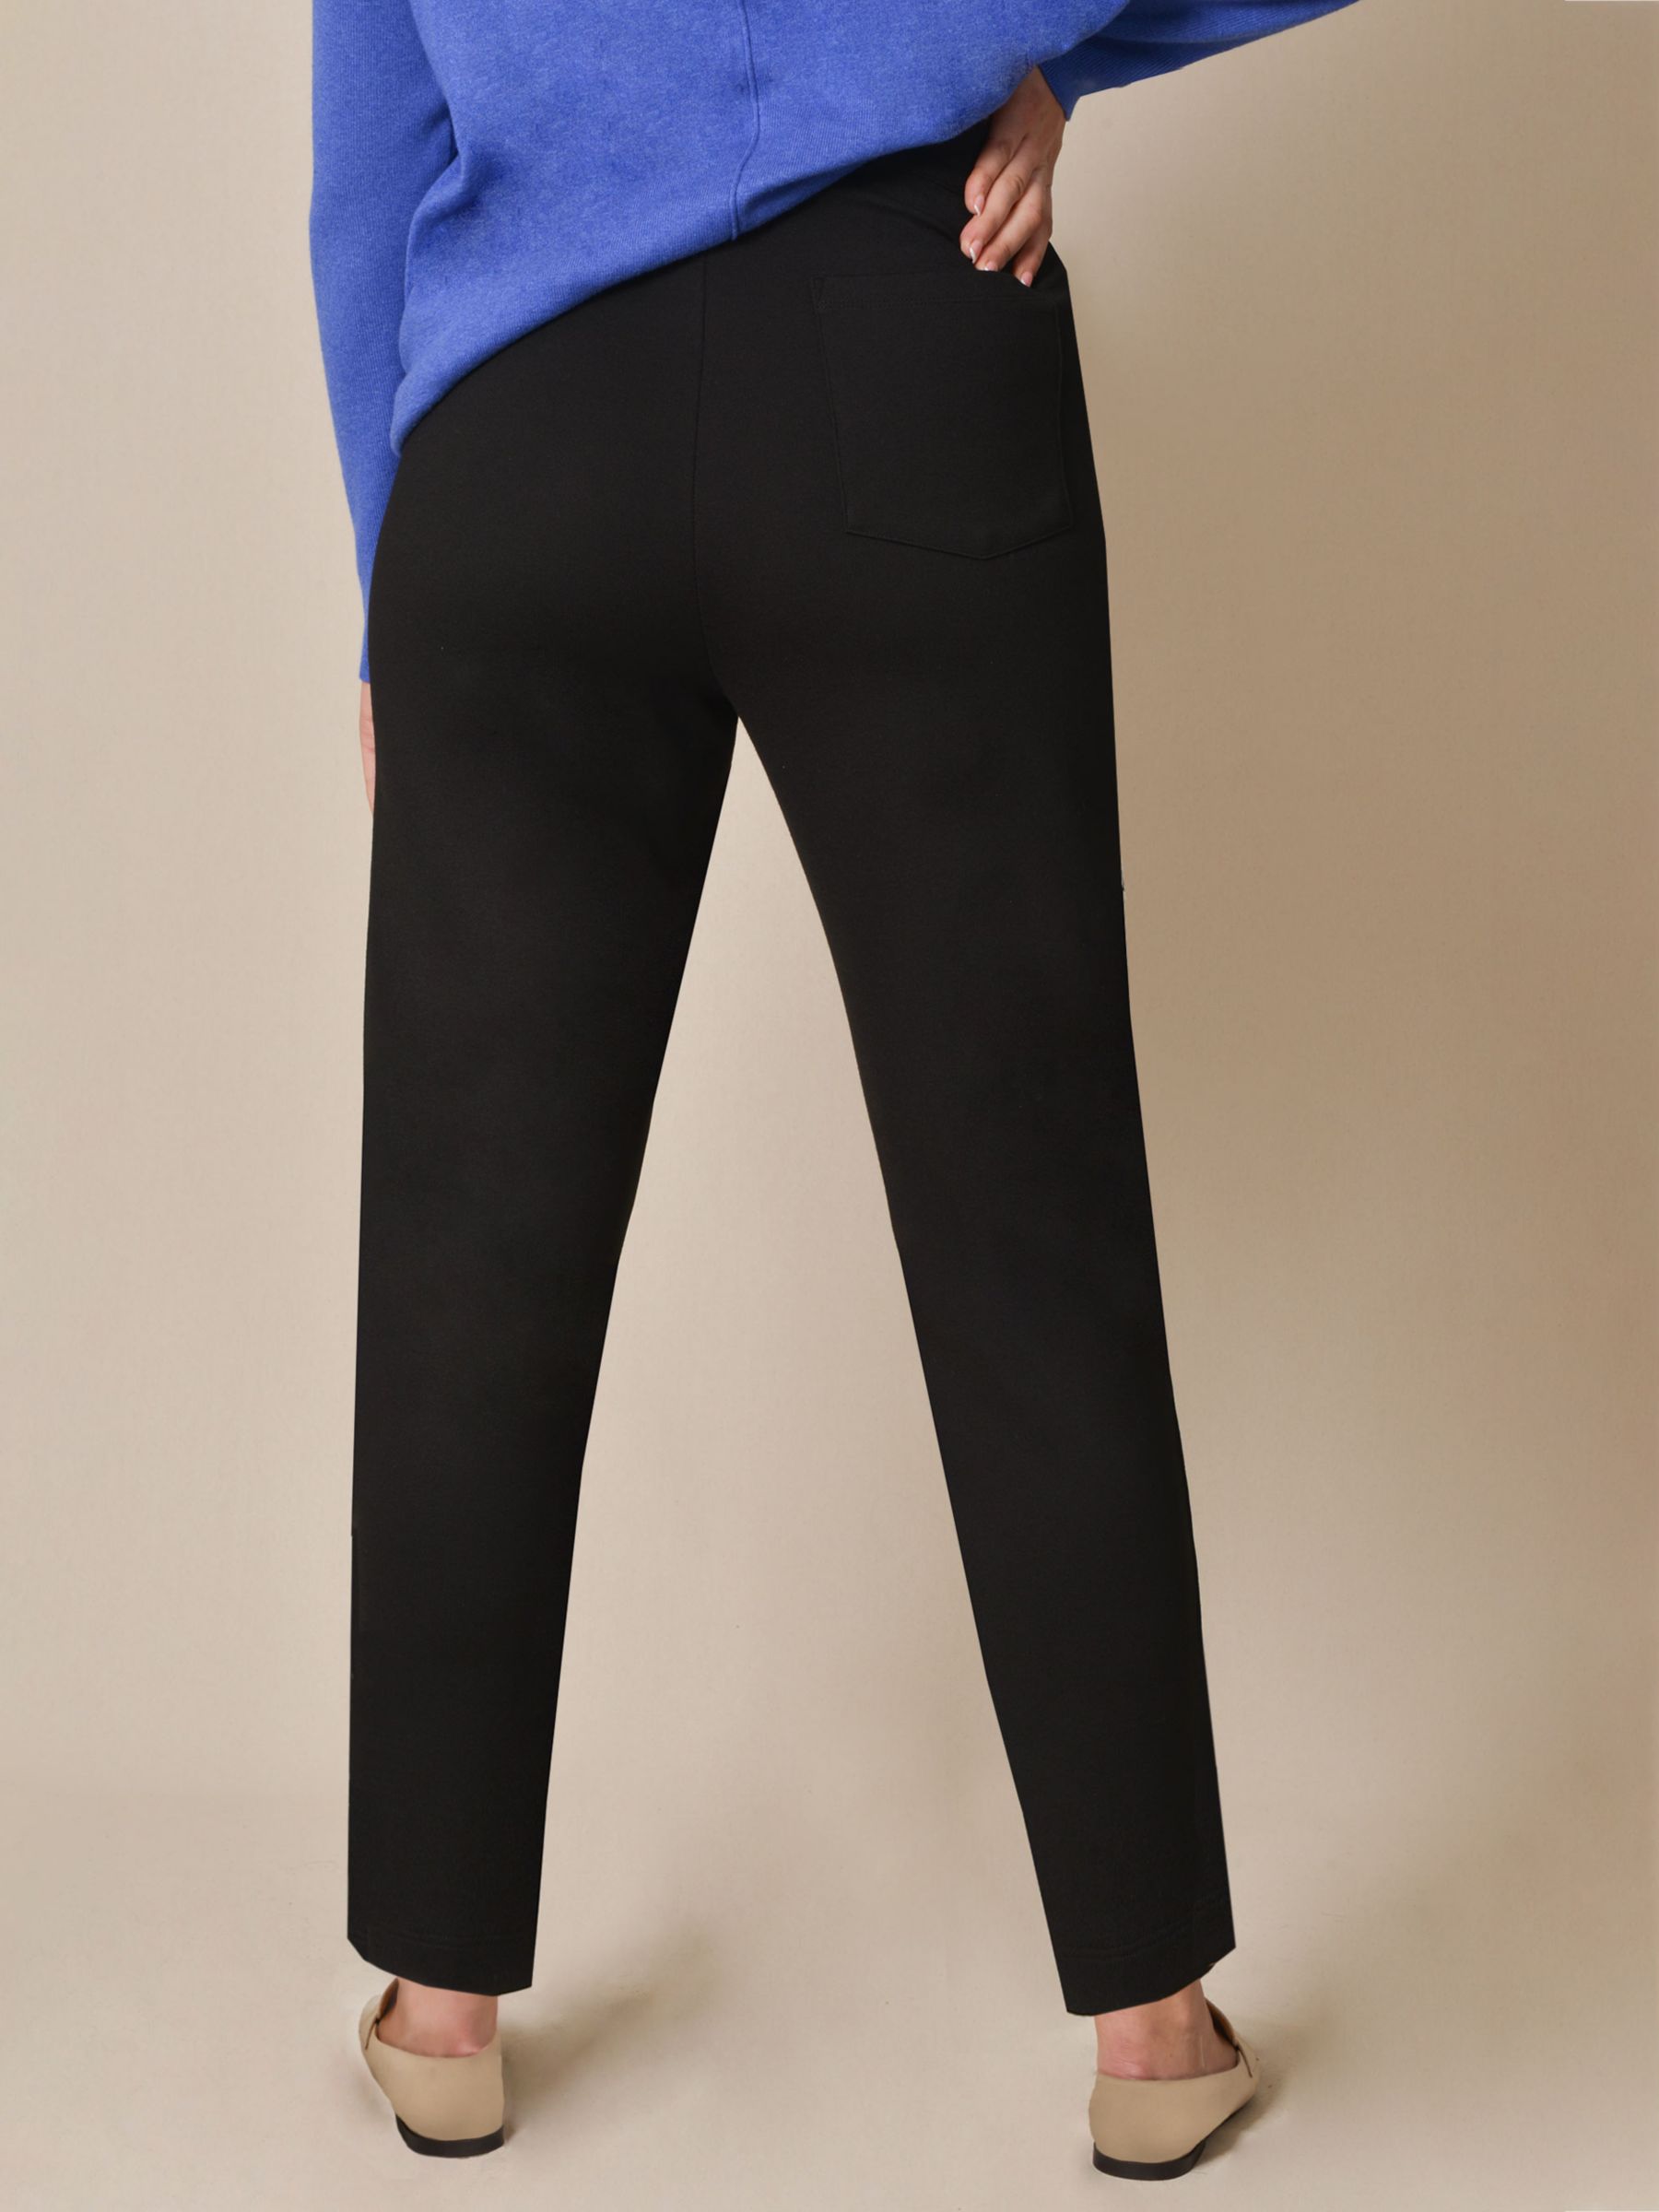 Buy Live Unlimited Tapered Trousers, Black Online at johnlewis.com